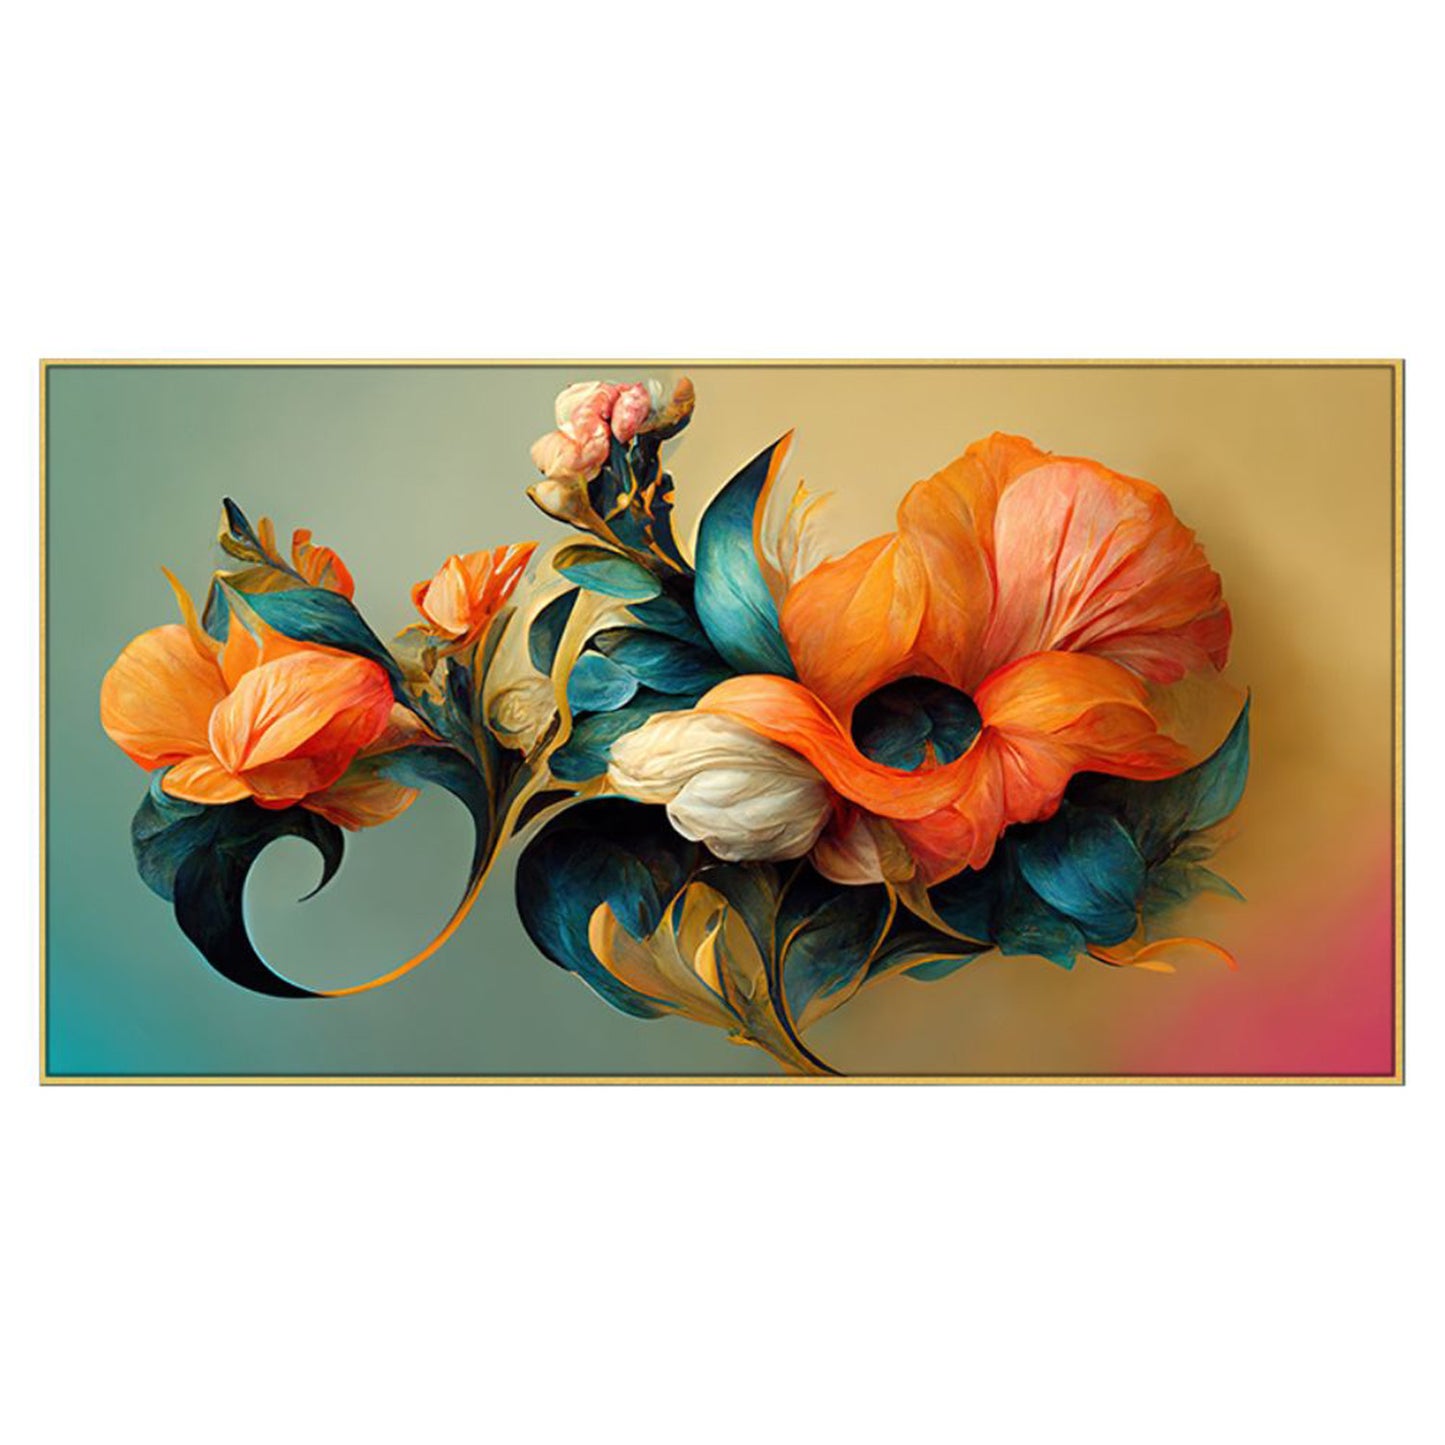 Vibrant Floral Bouquet in Gold Wall Painting